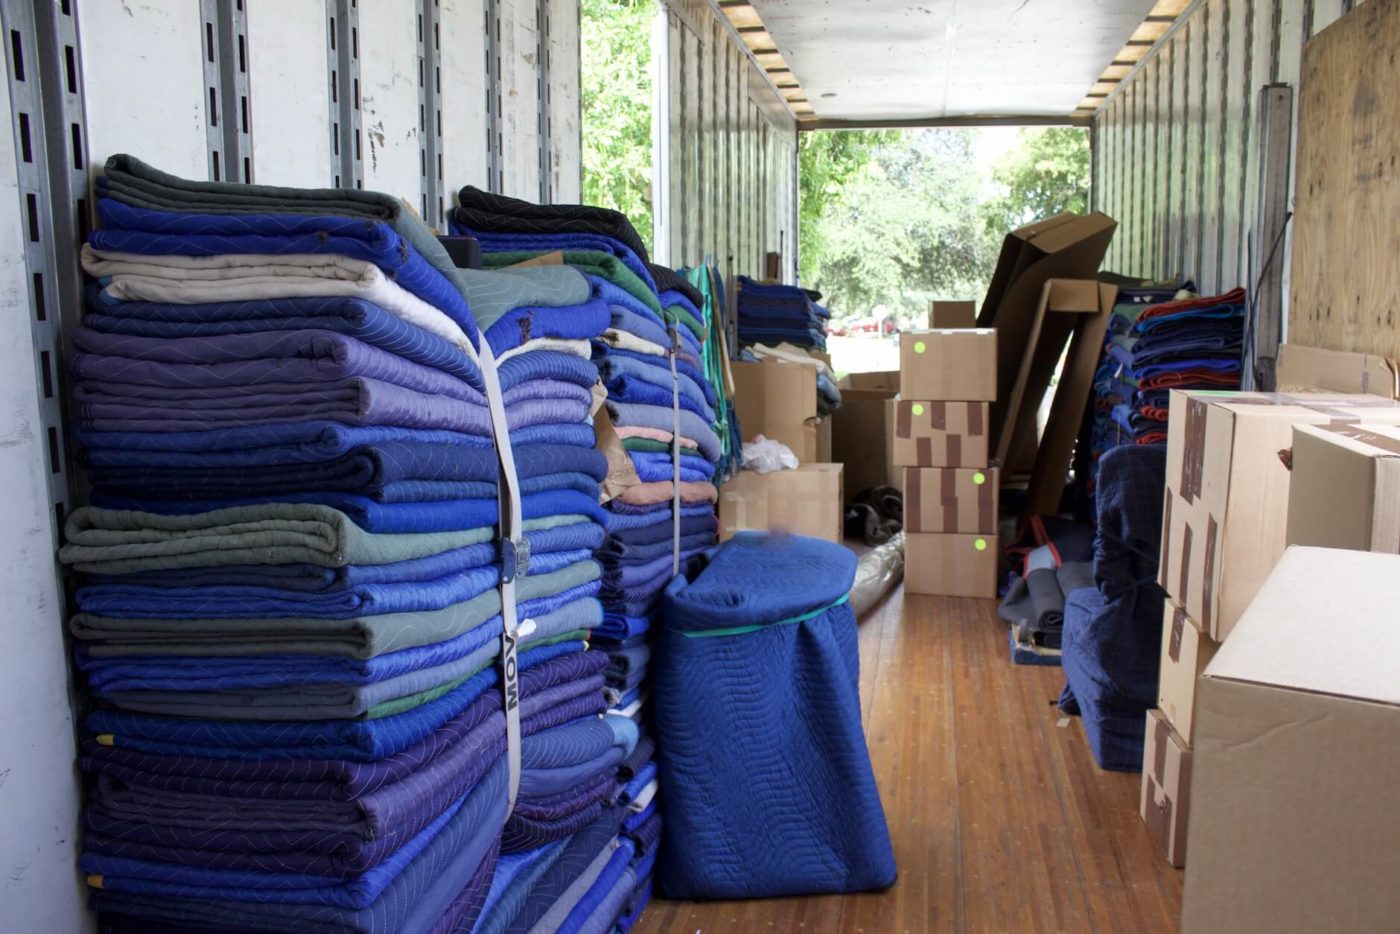 Stacked relocation blankets at an auto transport company